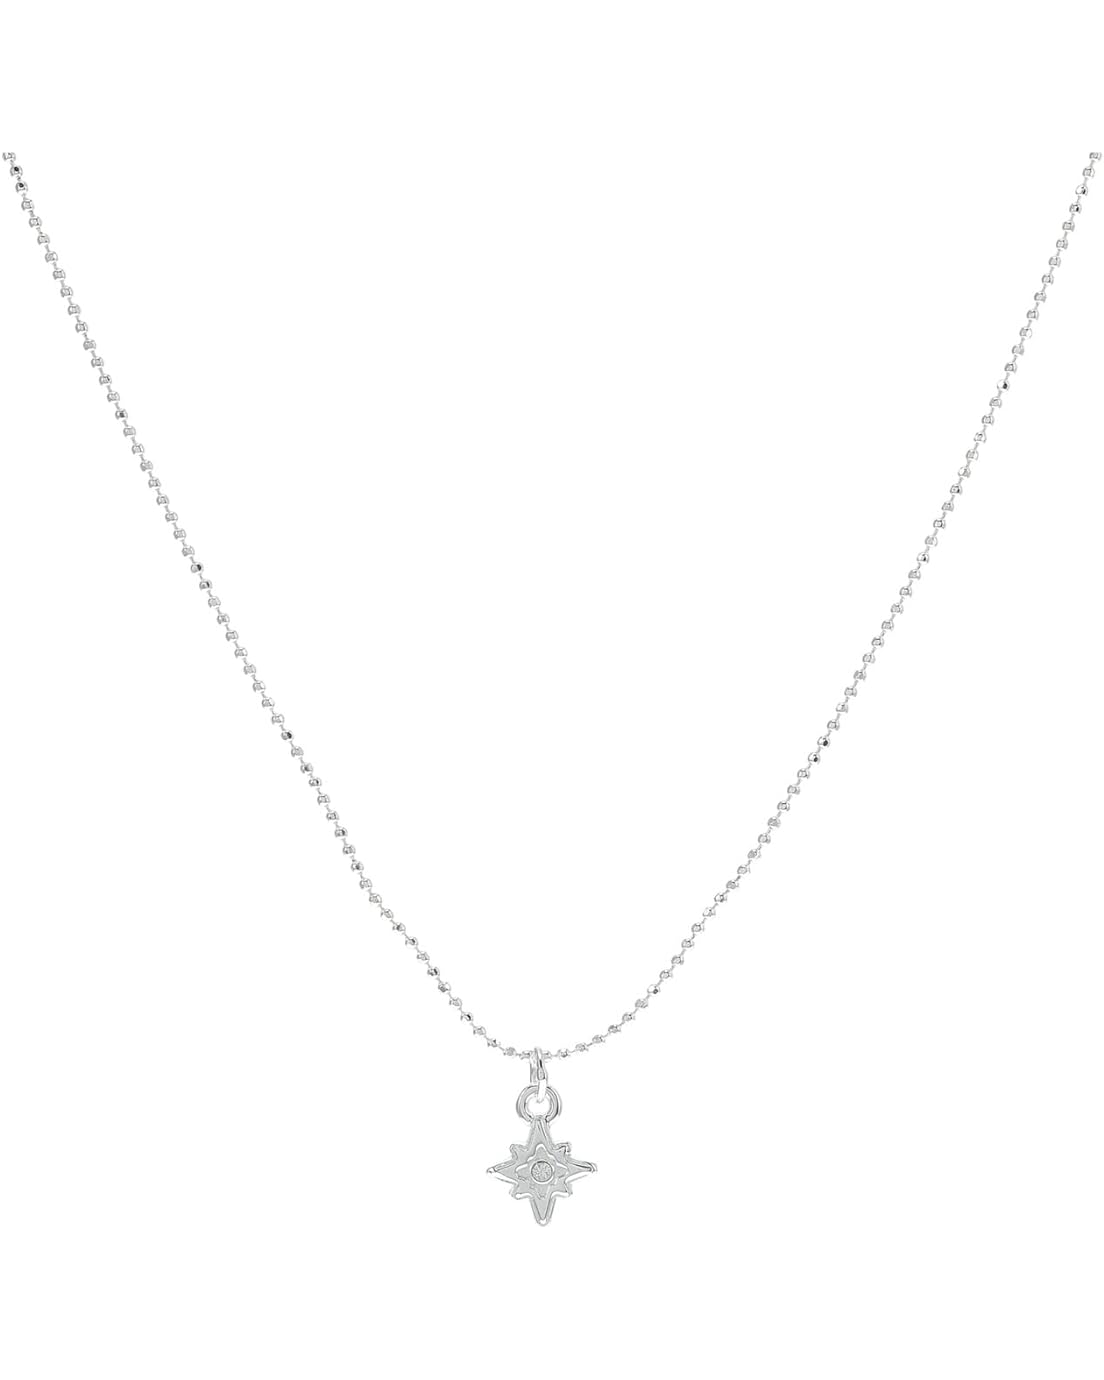 Alex and Ani North Star Dainty Necklace